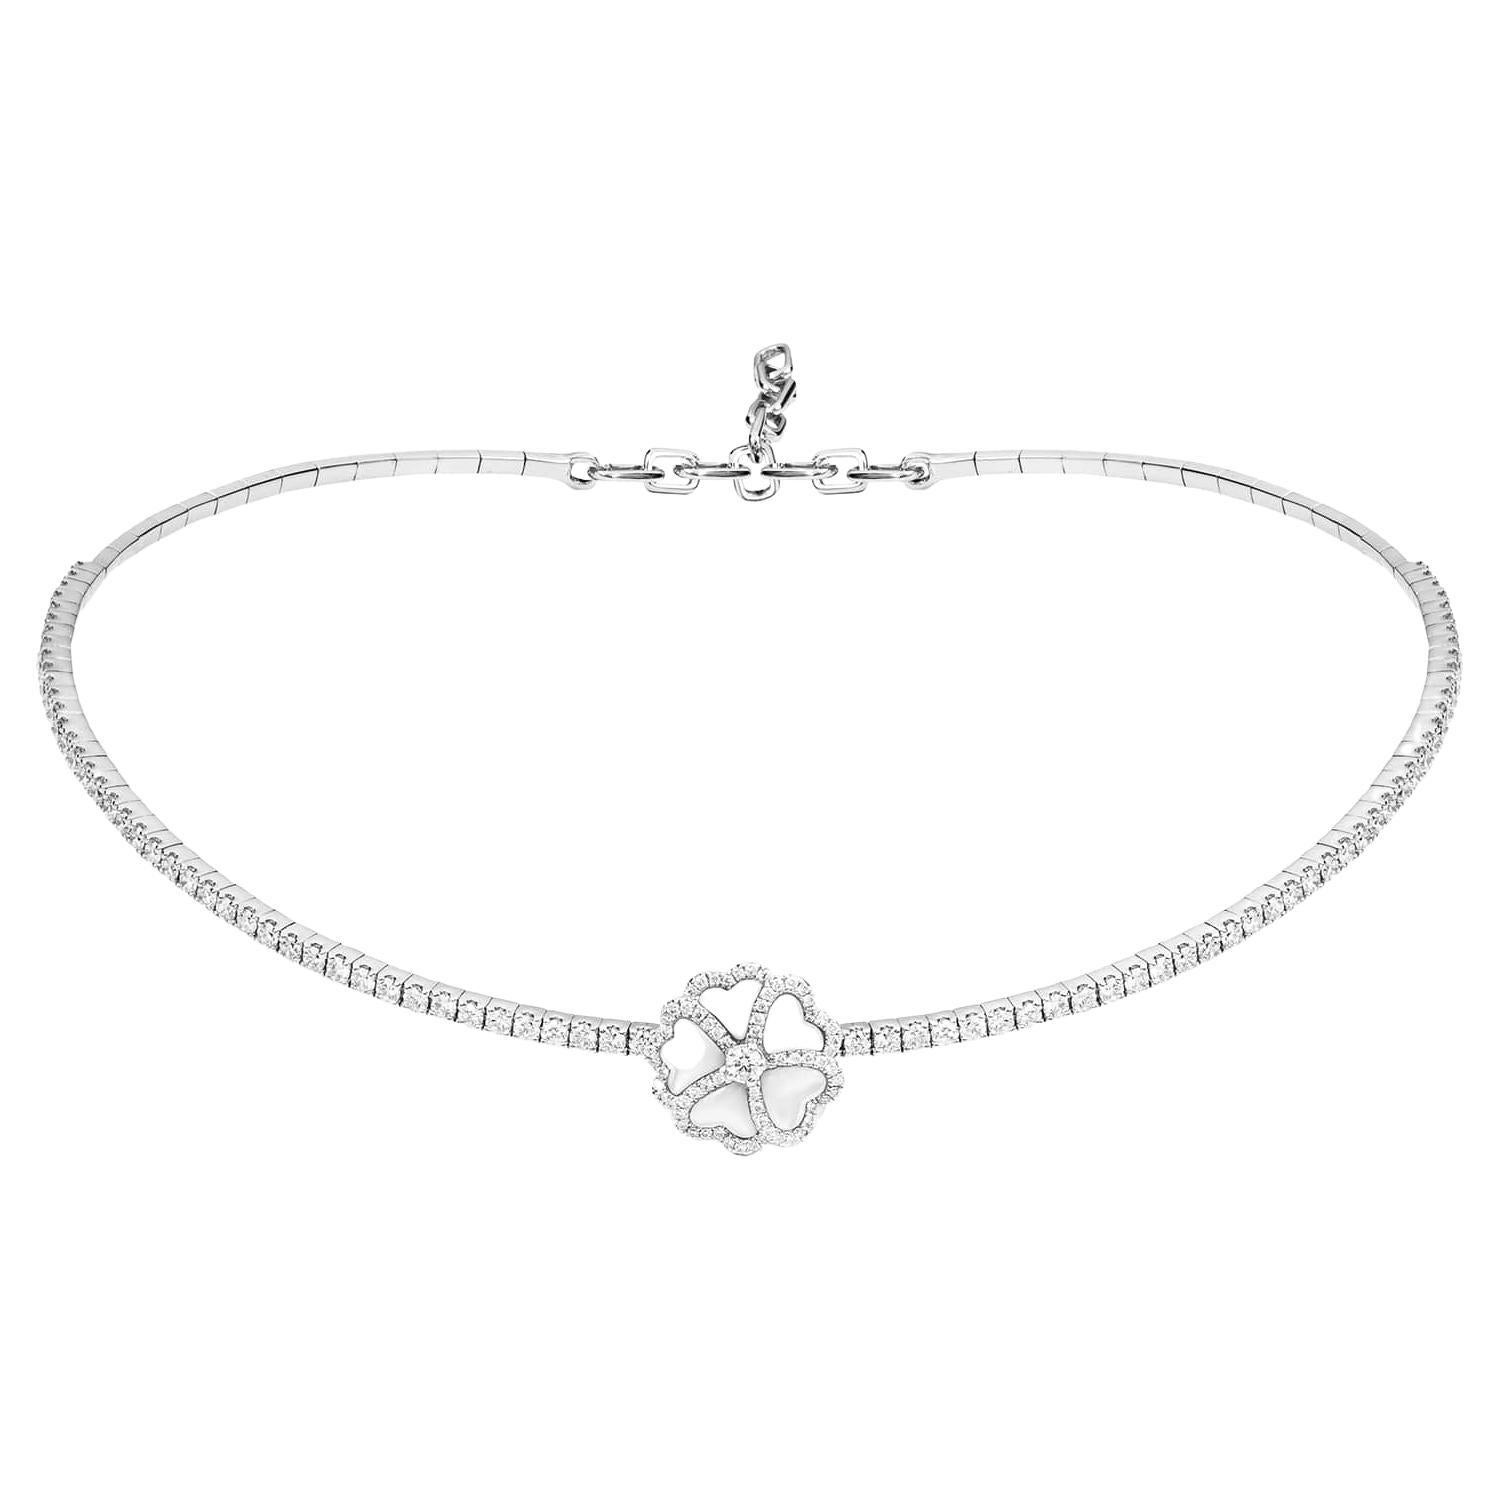 Bloom Diamond and Mother of Pearl Flower Choker Necklace in 18k White Gold